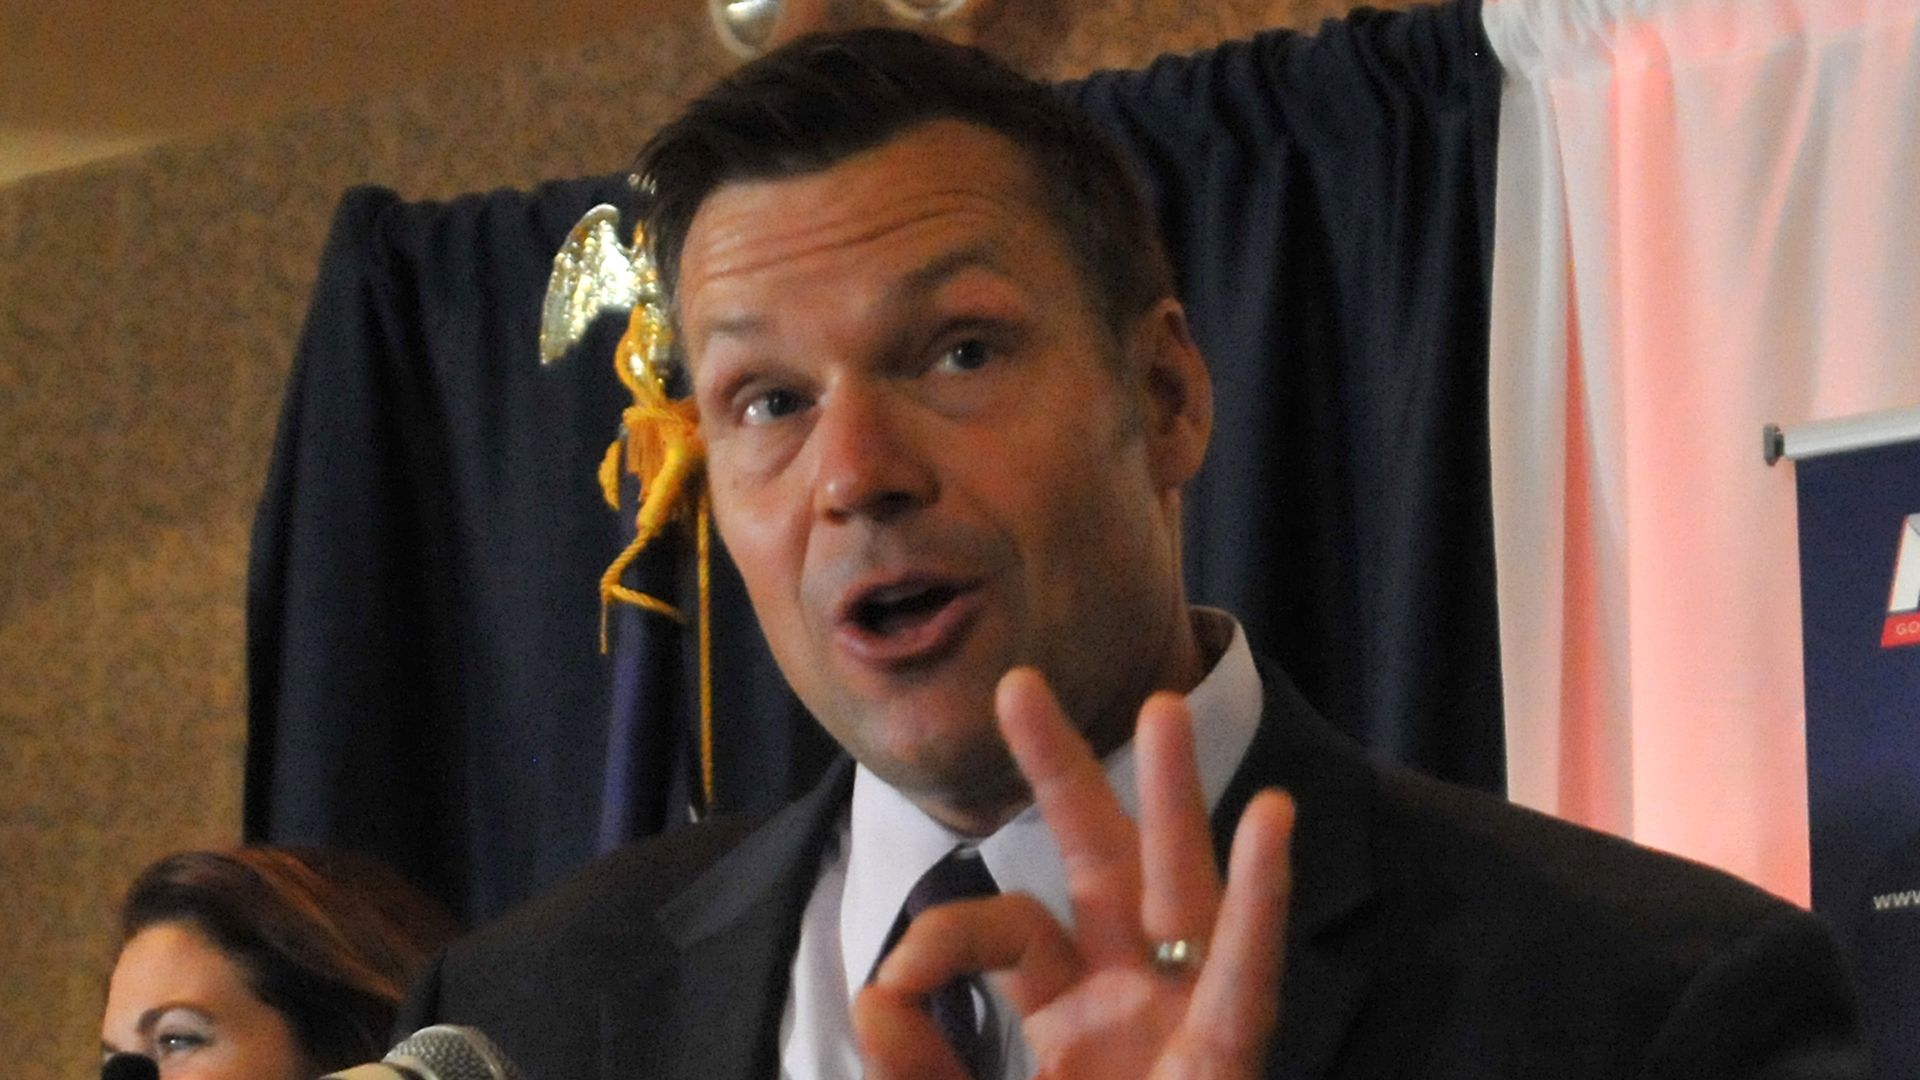 Kris Kobach speaking at a microphone holding up the "okay" sign with his left hand